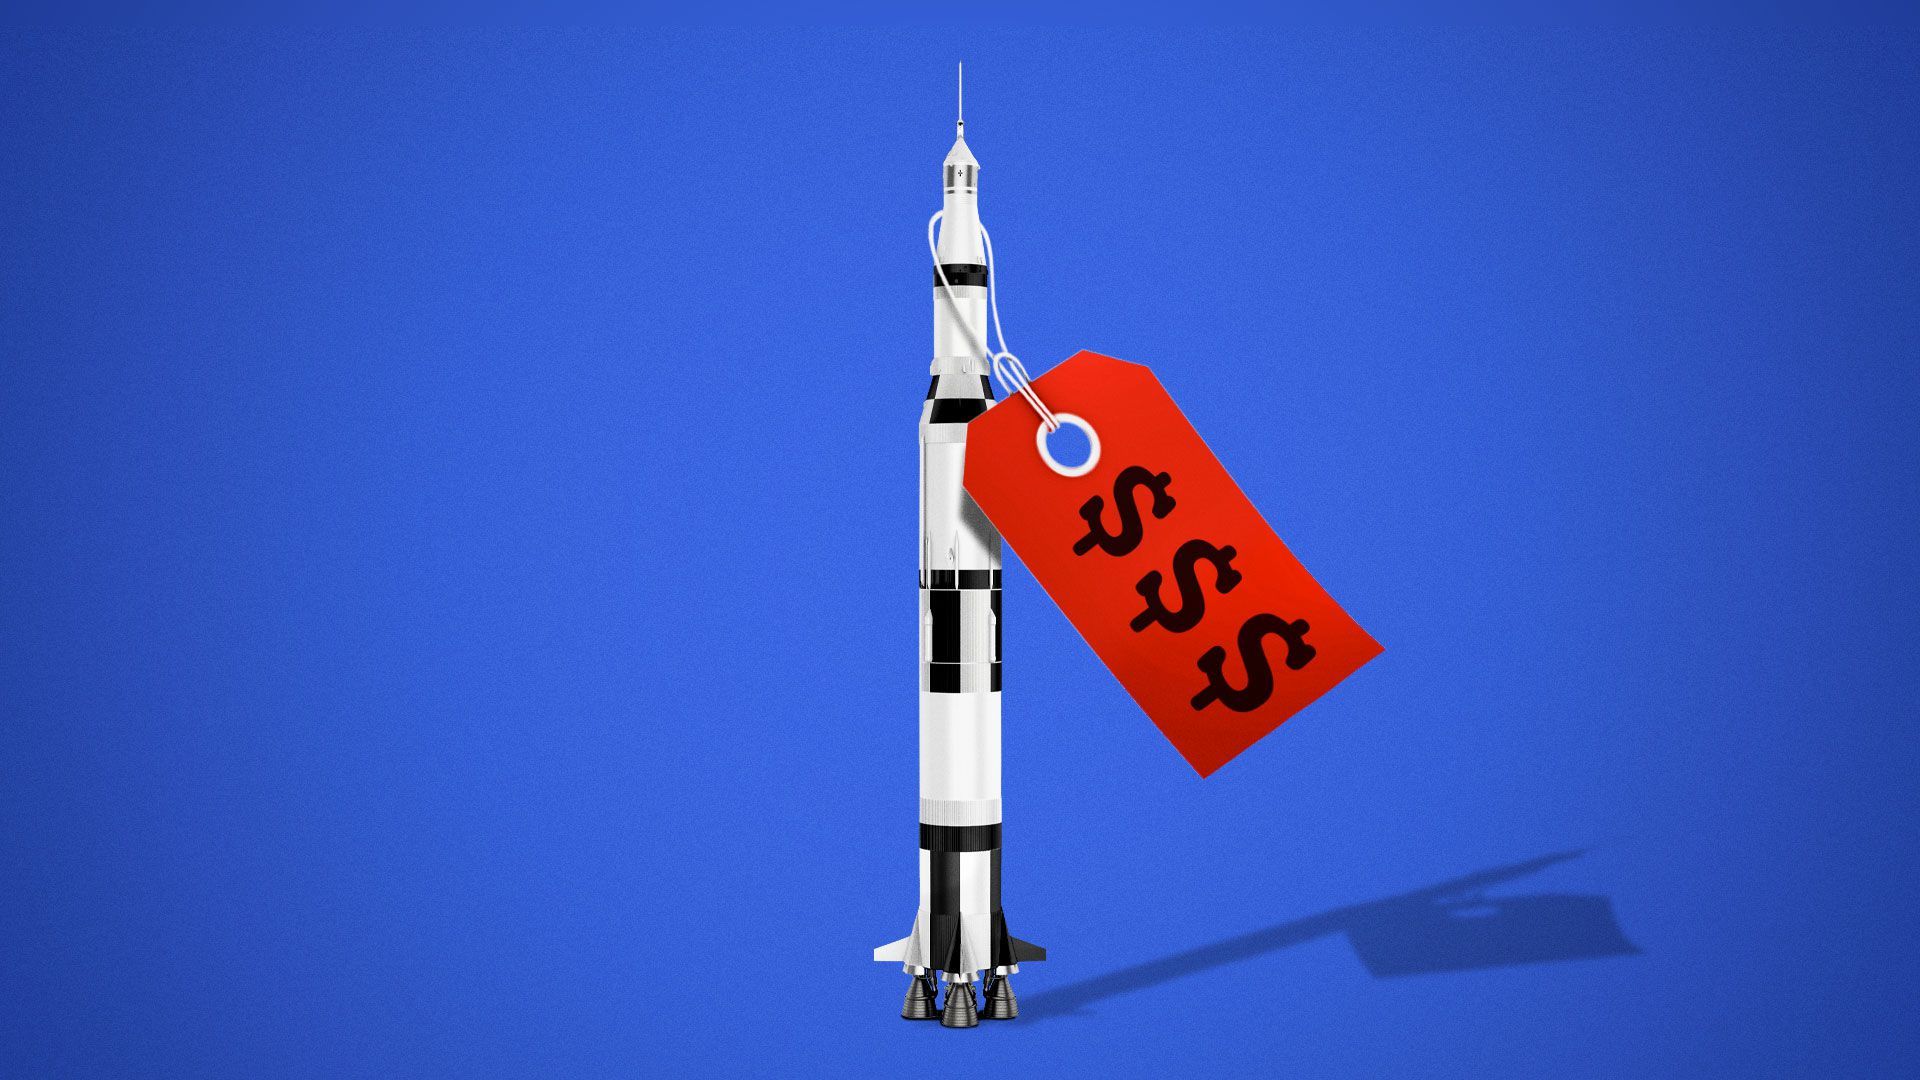 Illustration of rocket with giant price tag